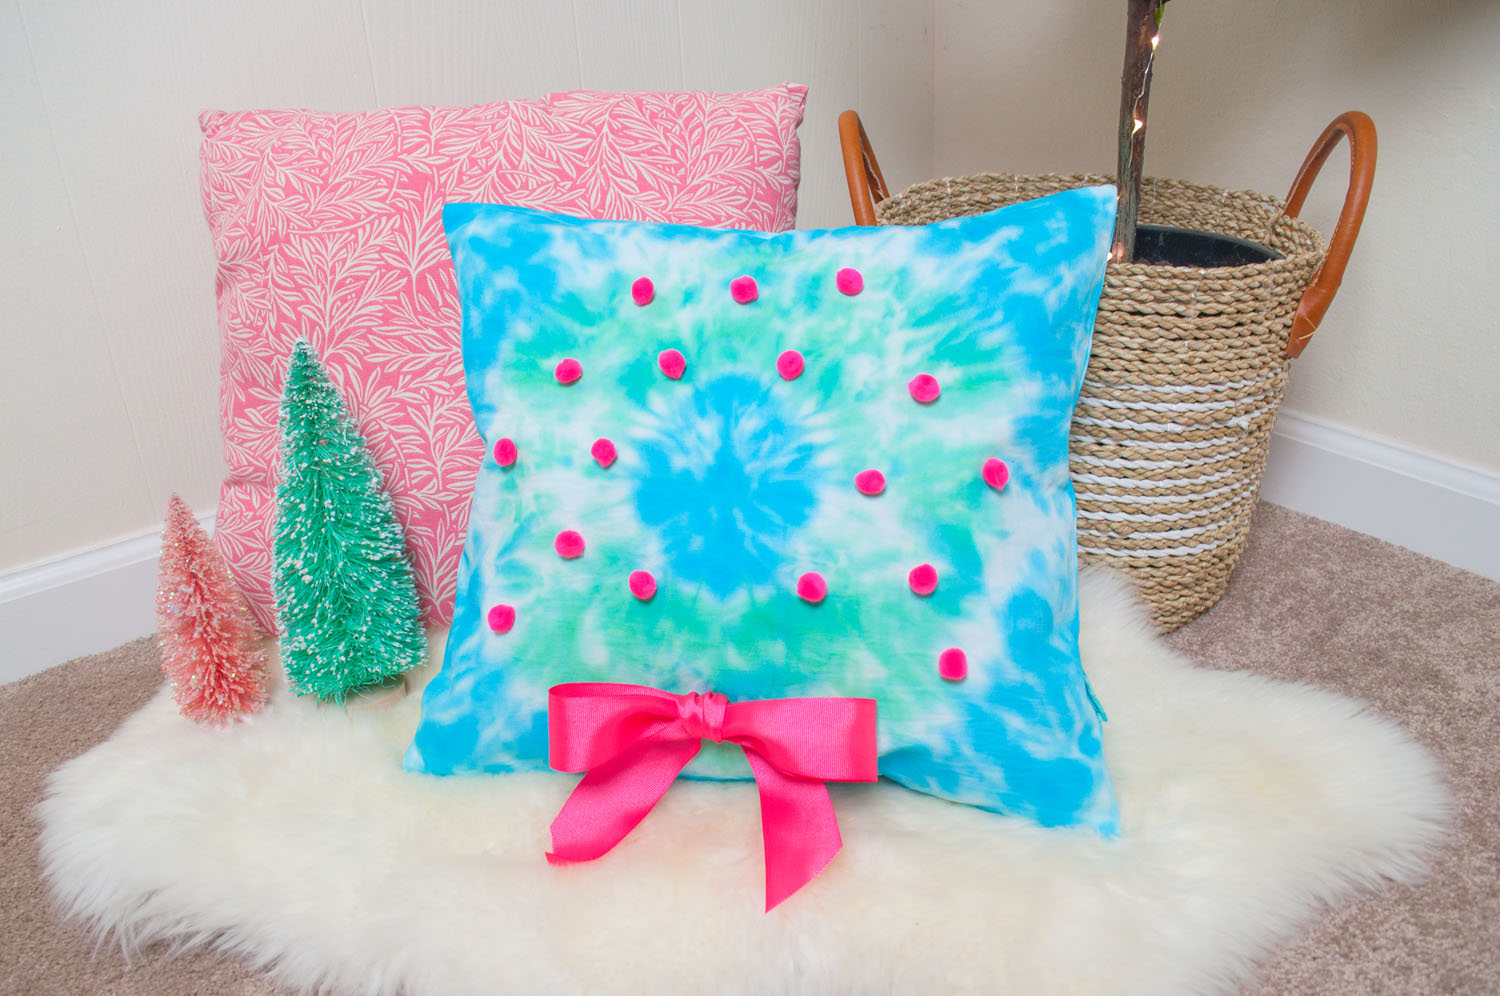 Tie dye wreath pillow placed on faux fur rug. There is a pink pillow and fiddle leaf plant behind it. Bottle brush trees are placed to the left of the pillow.